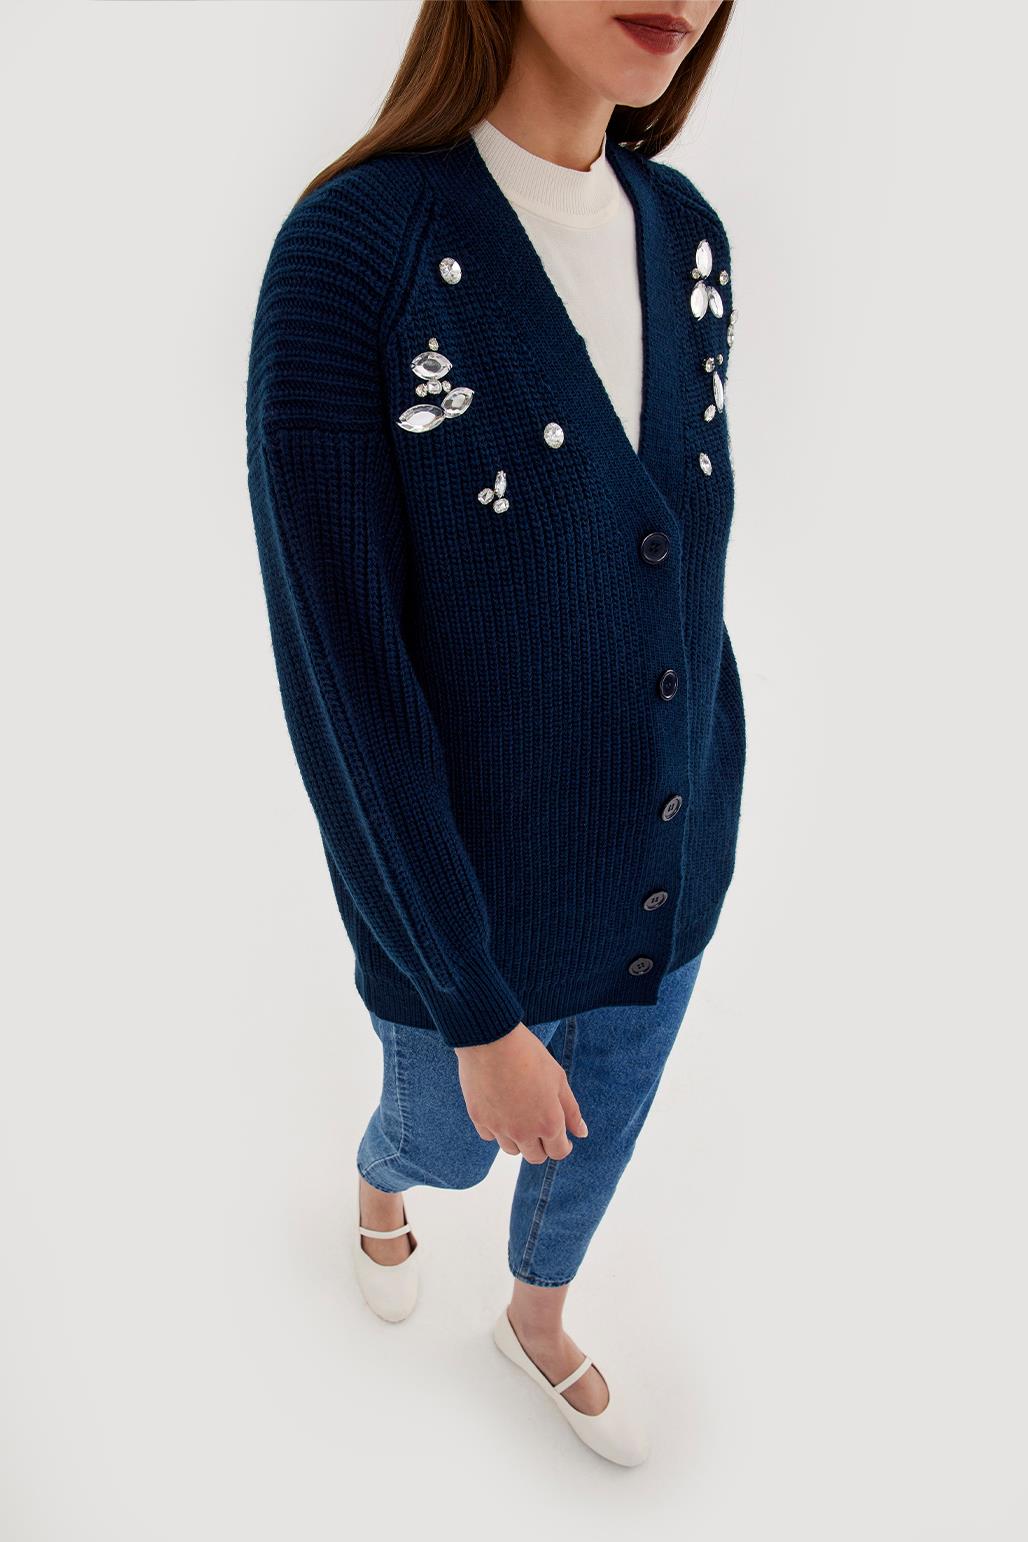 Stone Embroidered Cardigan Navy Blue